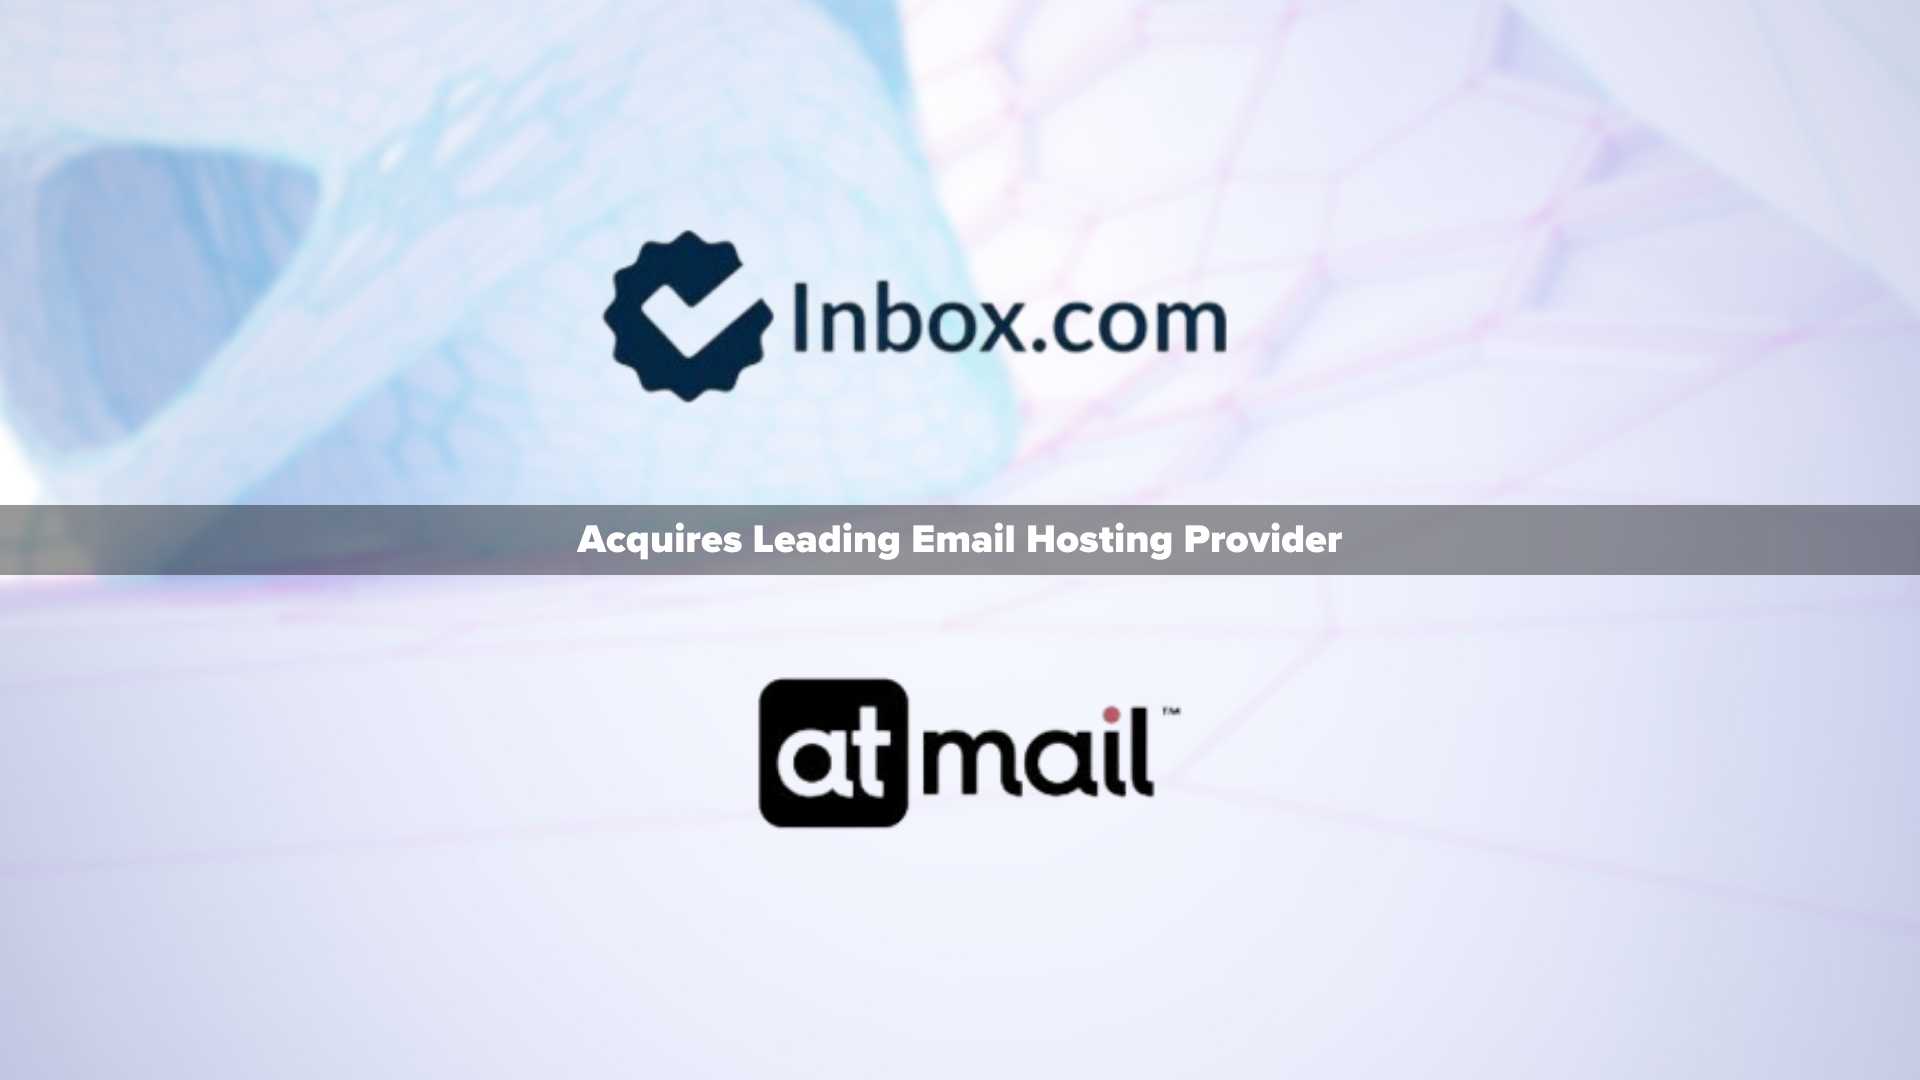 Inbox.com Acquires Leading Email Hosting Provider Atmail